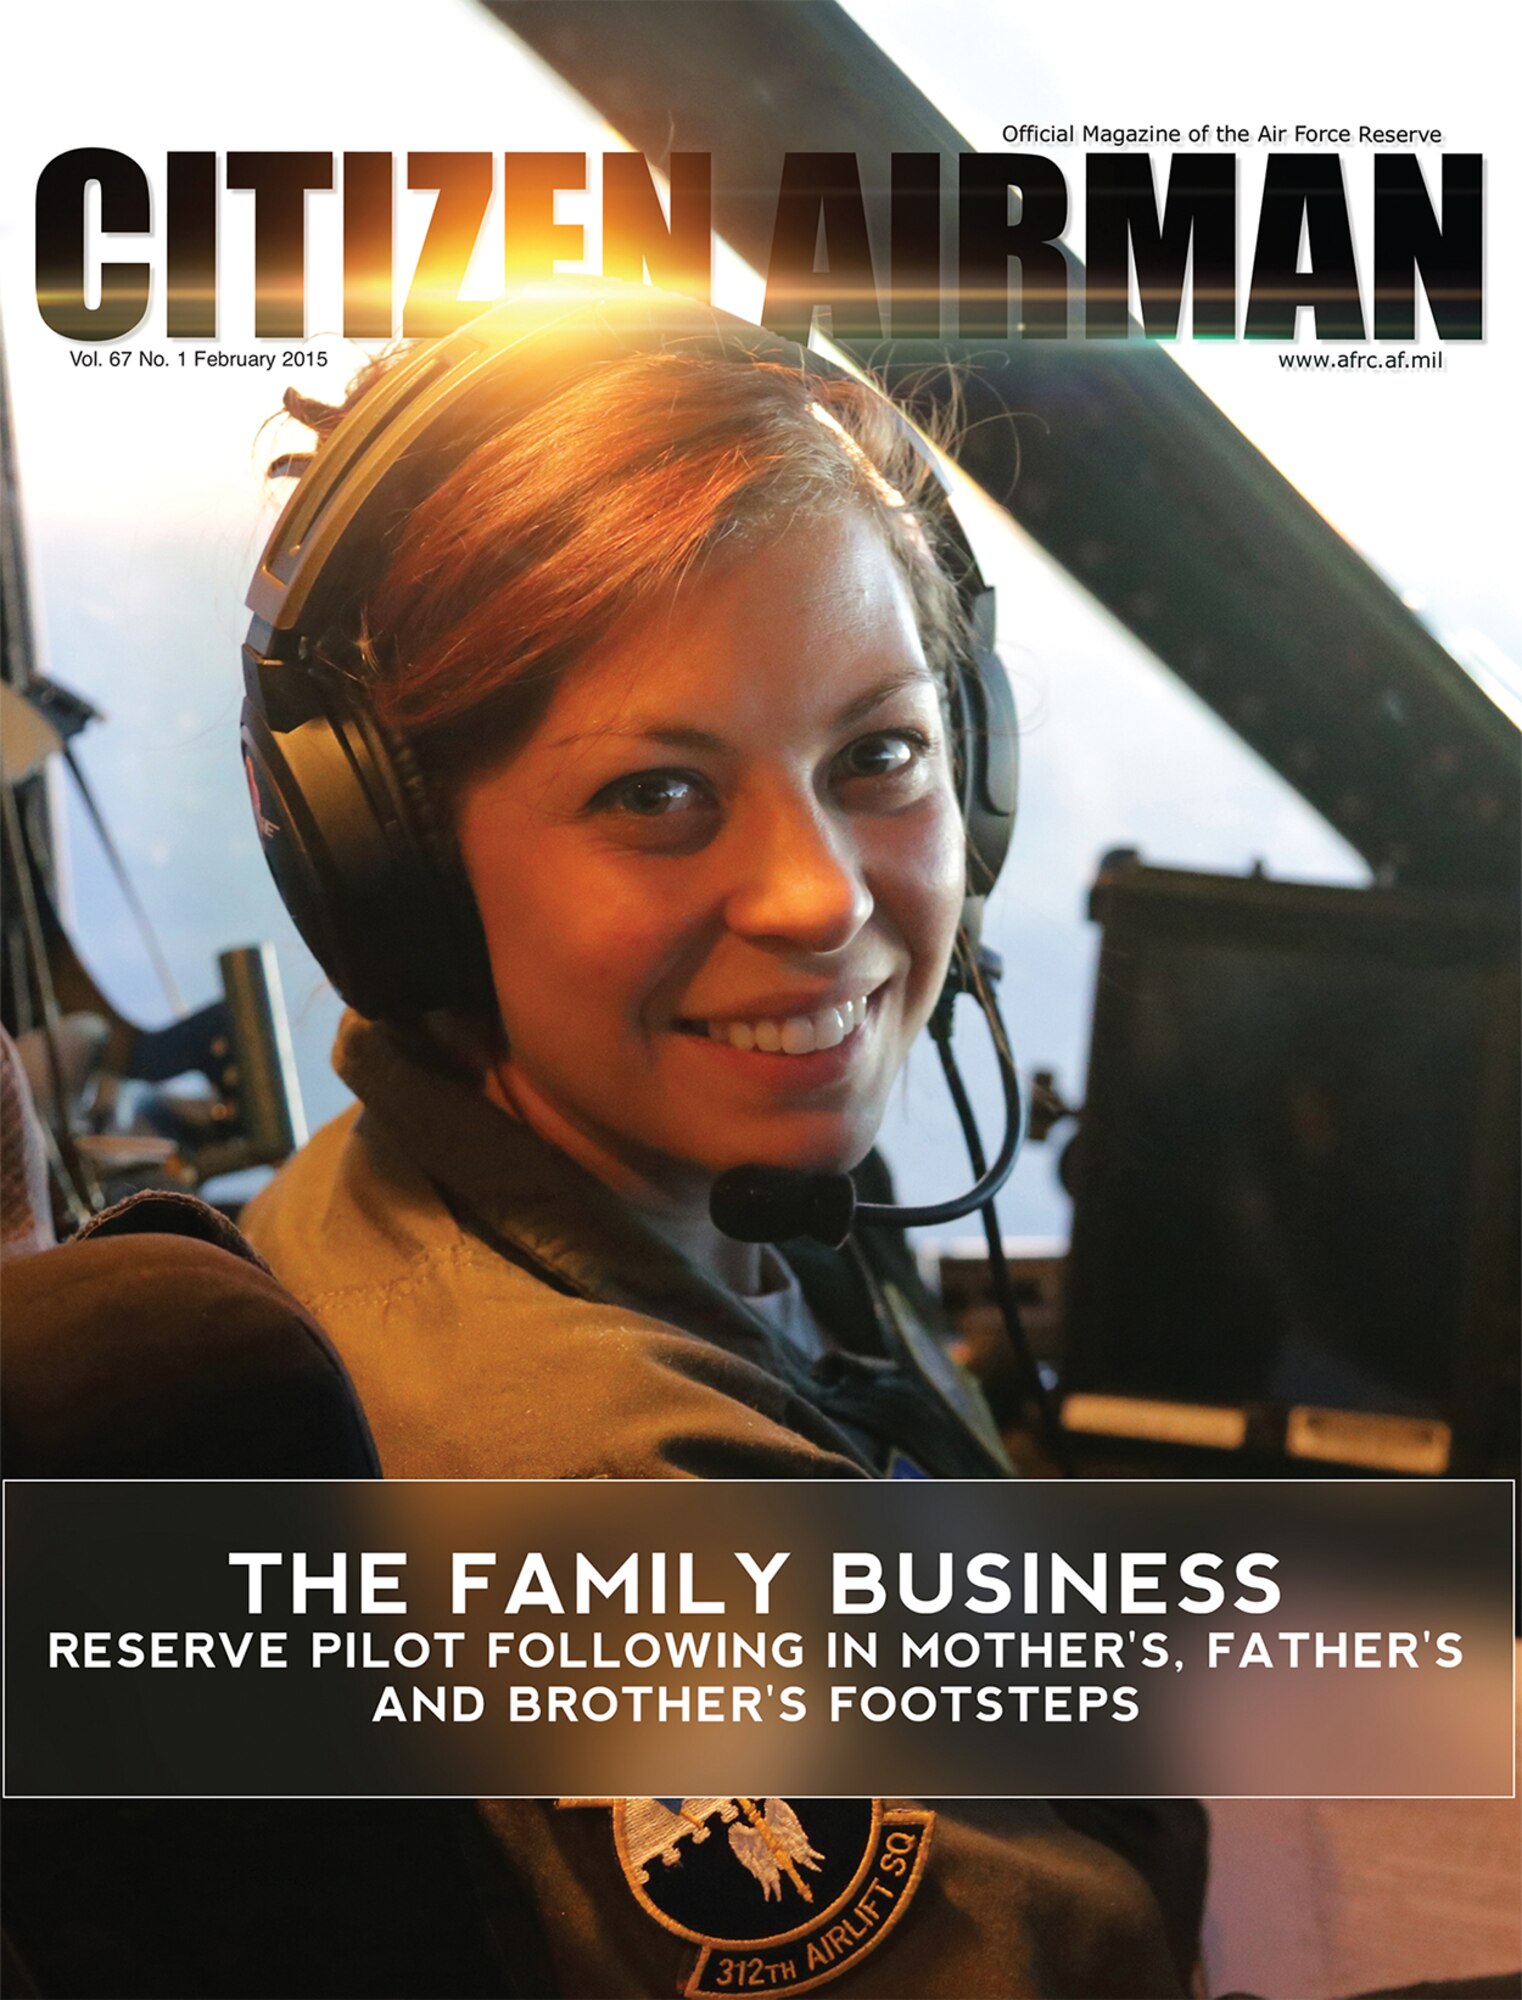 The February issue of Citizen Airman magazine is now available online at http://www.citamn.afrc.af.mil/. The cover story features 1st Lt. Meaghan Cosand of the 349th Air Mobility Wing, who is following in her mother's, father's and brother's footsteps as a pilot. The issue also includes stories
about opportunities for enlisted Reservists to attend the Air Force Academy, a chaplain whose passion for serving others has led him to the U.S. House of Representatives, Post-9/11 GI Bill benefits and an amateur radio operator in
Arkansas who is using his skills to help save lives during severe weather.
